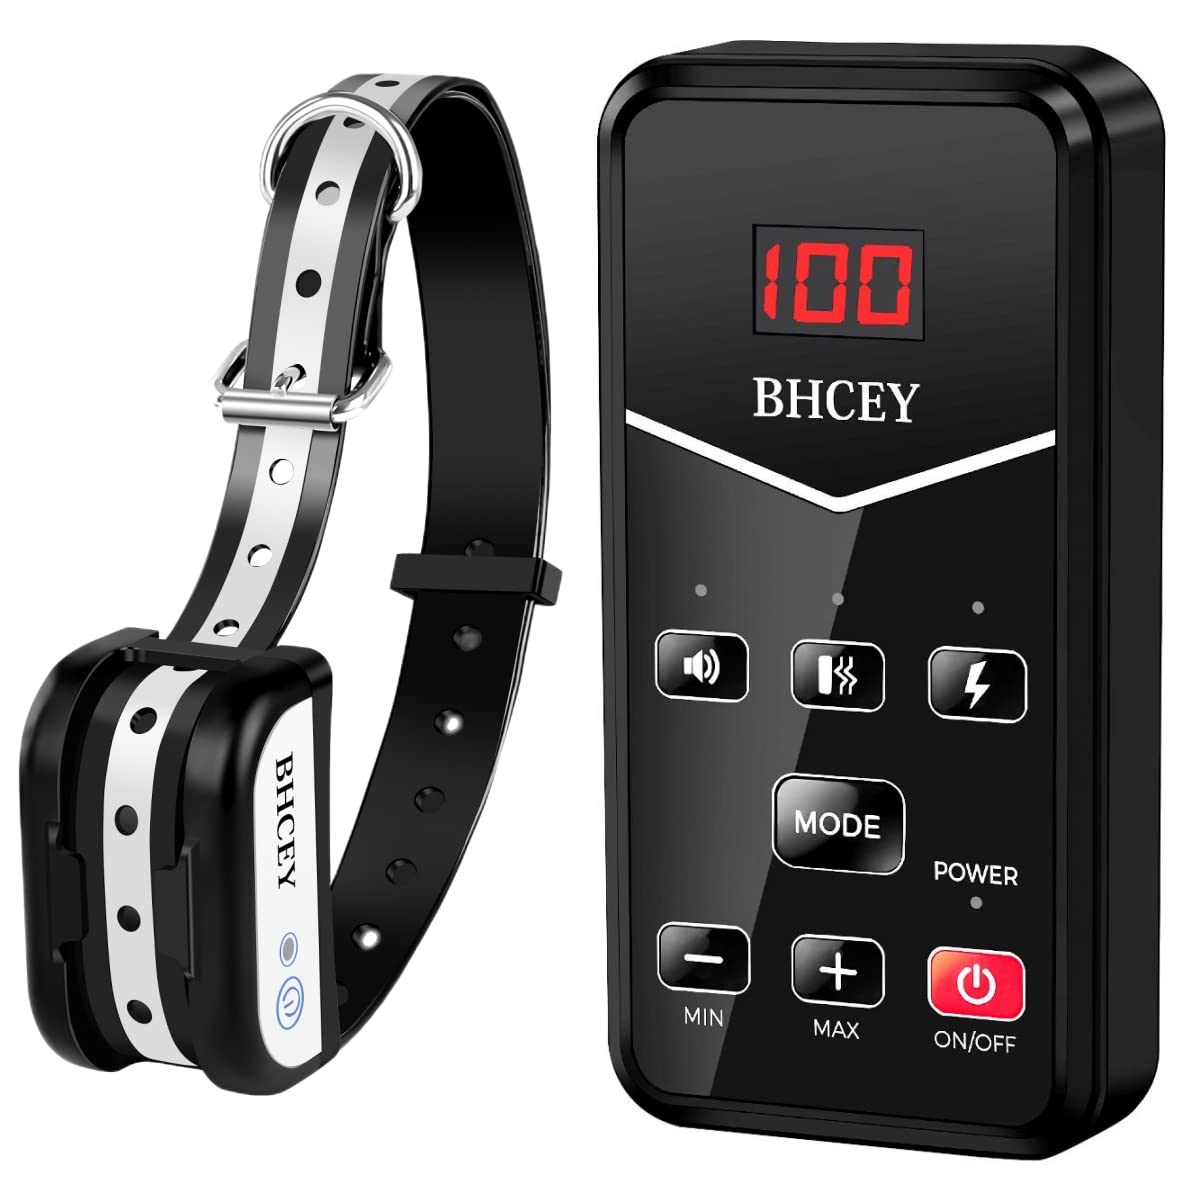 Bhcey Wireless Dog Fence, 2 In 1 Electric Fence System For Dog Shock Training Collar With Remote, Perimeter Wireless Pet Contain